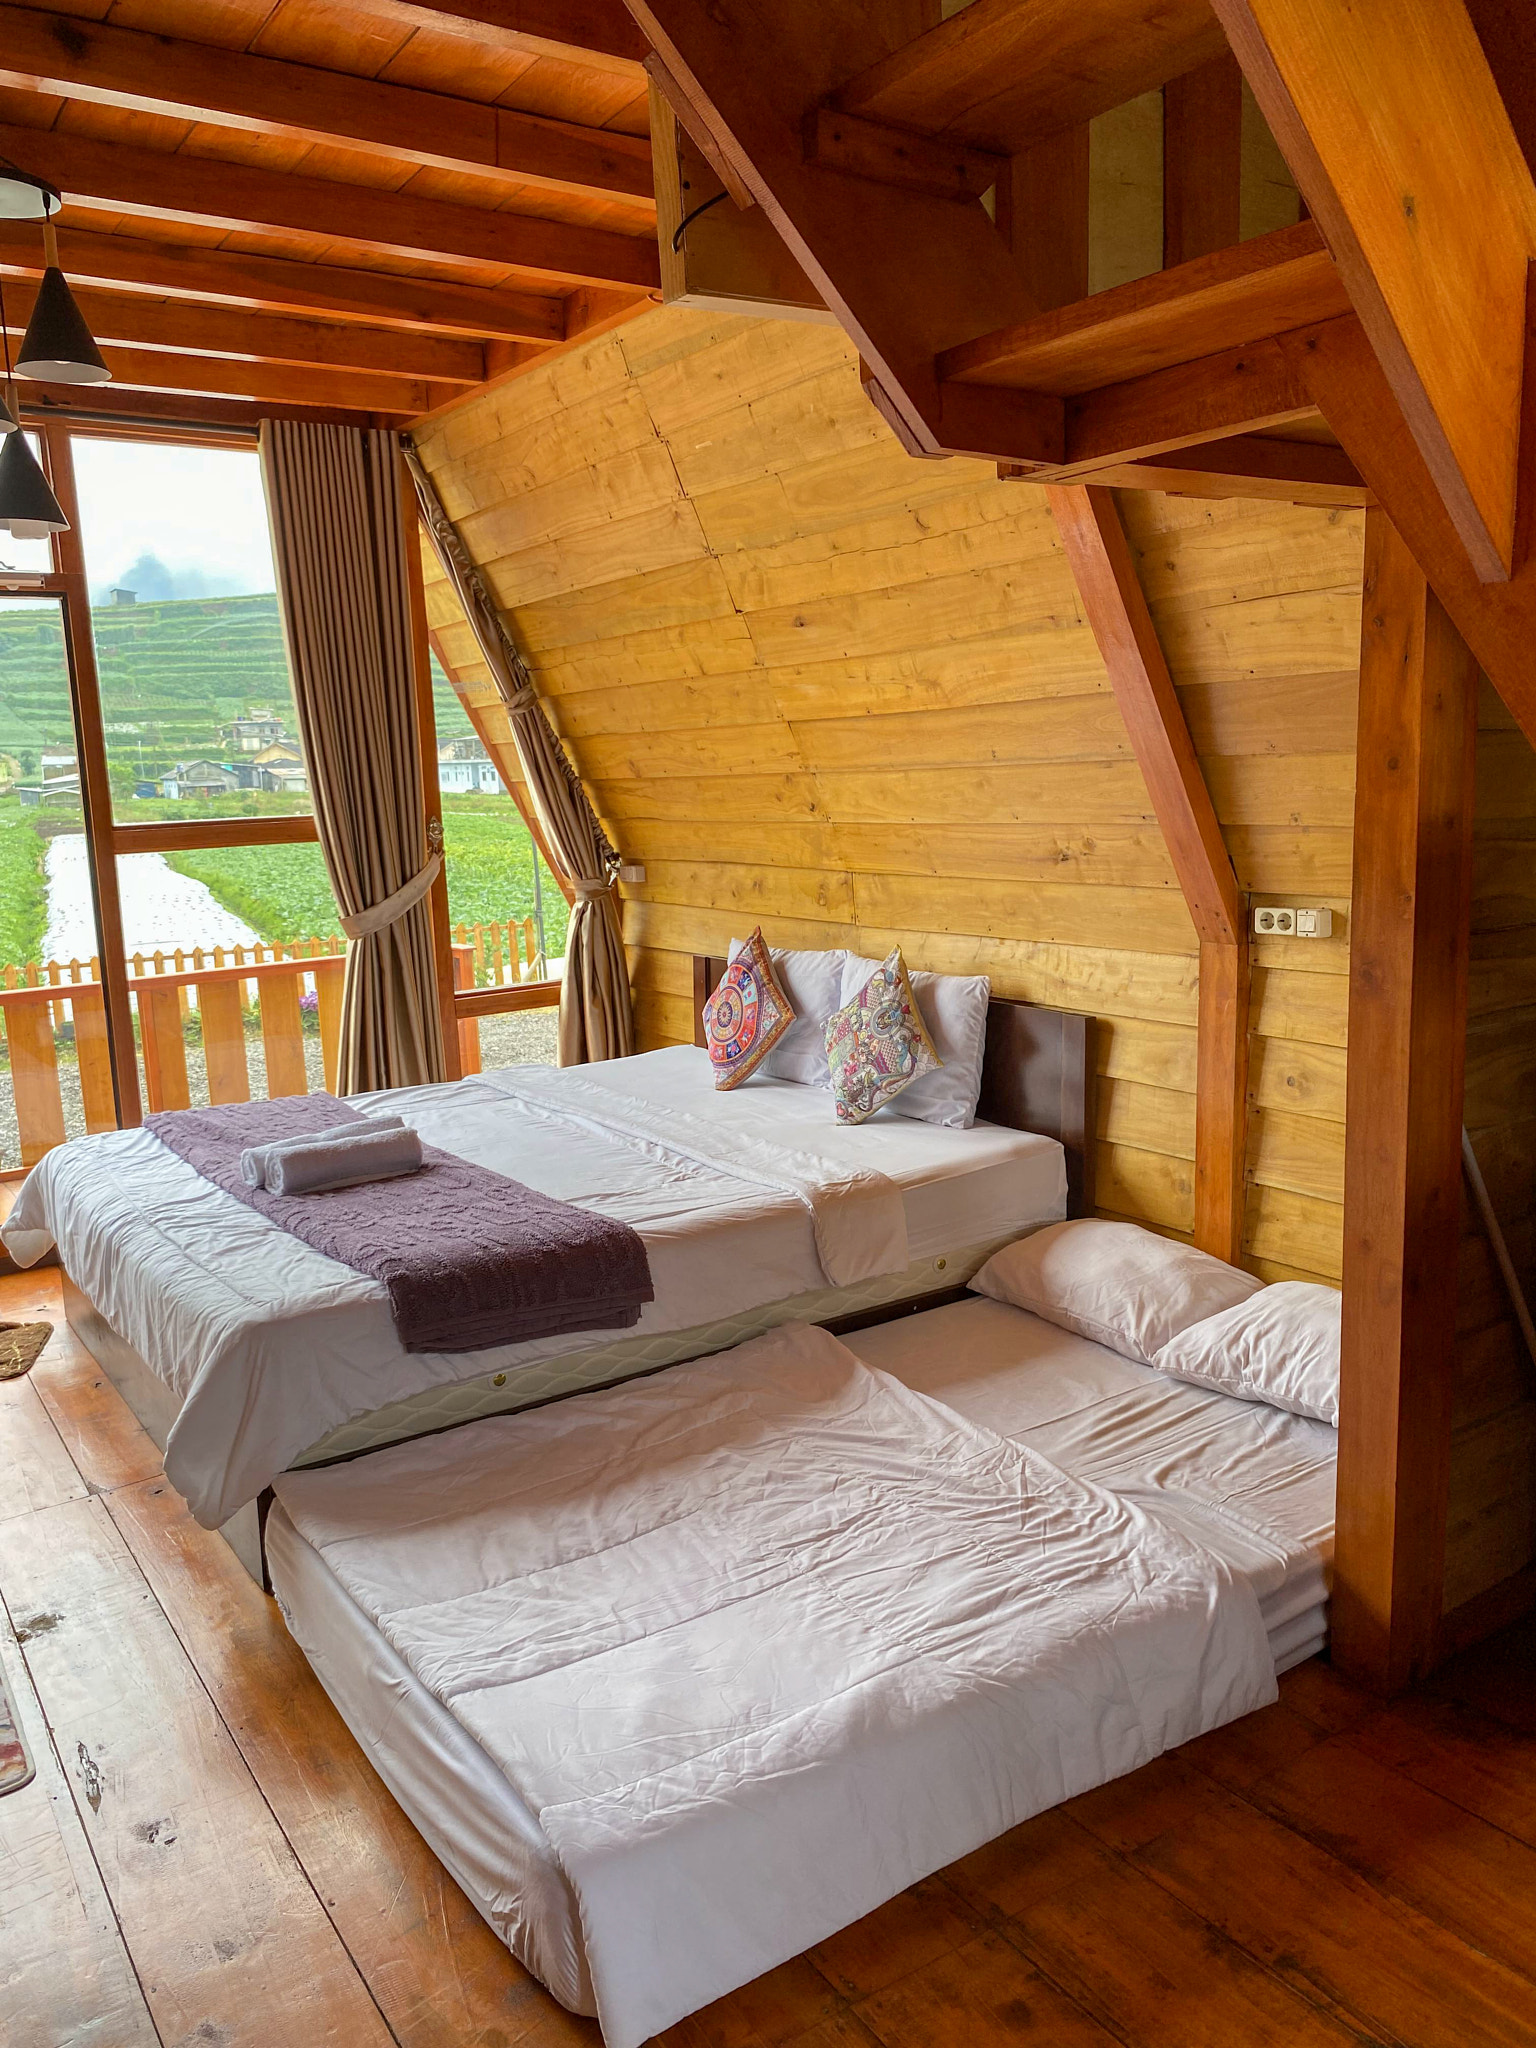 there are two beds in a room with a wooden ceiling